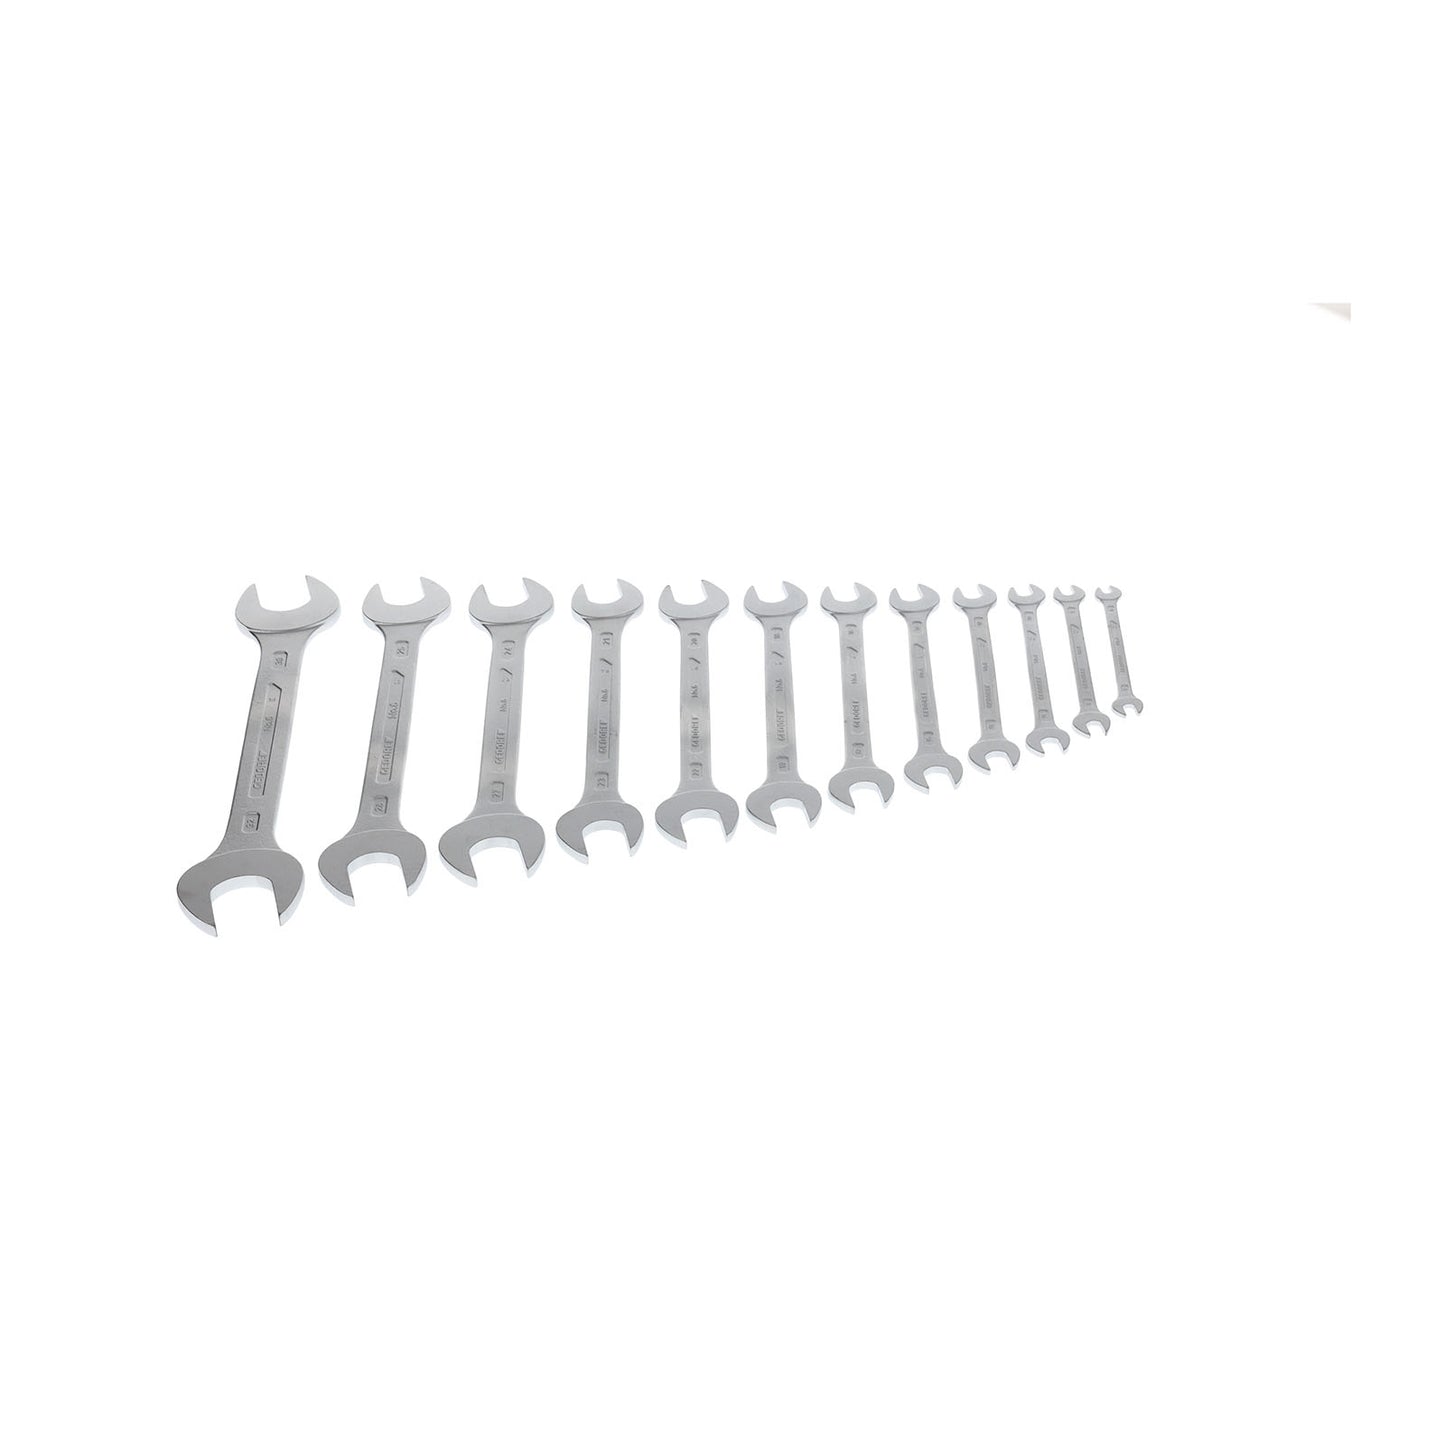 GEDORE 6-120 - Set of 12 2-Mount Fixed Wrenches (6077890)